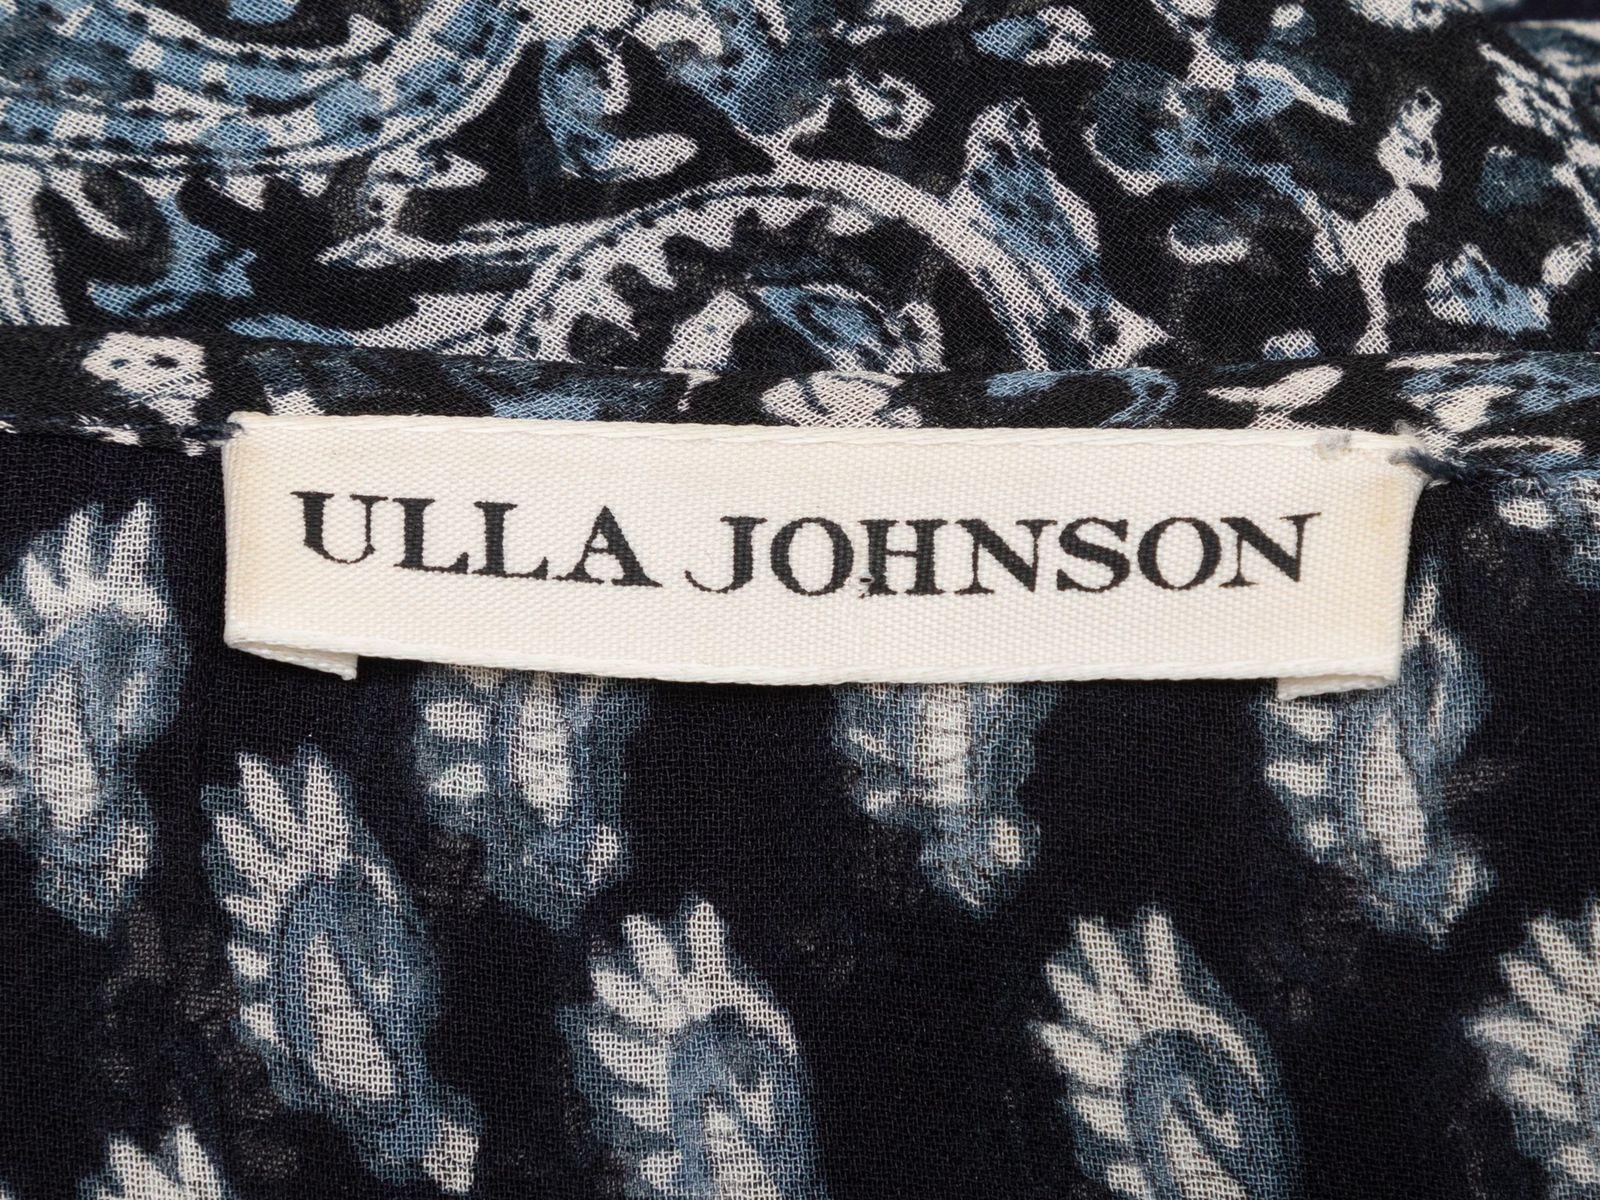 Product Details: Navy and white silk paisley print maxi dress by Ulla Johnson. Crew neck. Long sleeves. Button closures at front bodice. 34